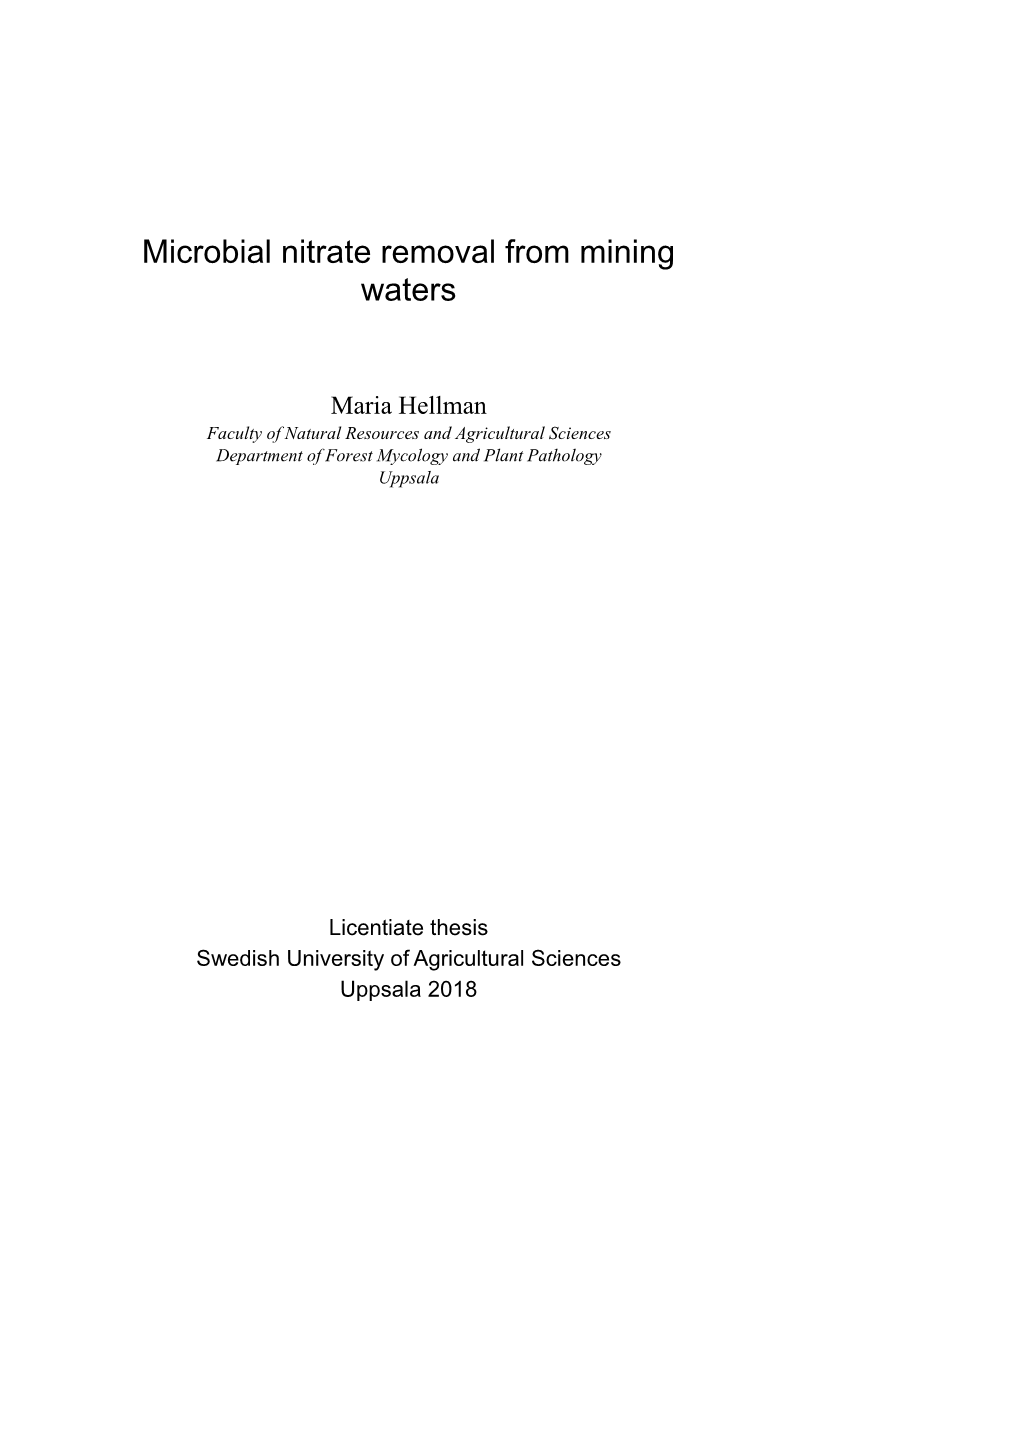 Microbial Nitrate Removal from Mining Waters